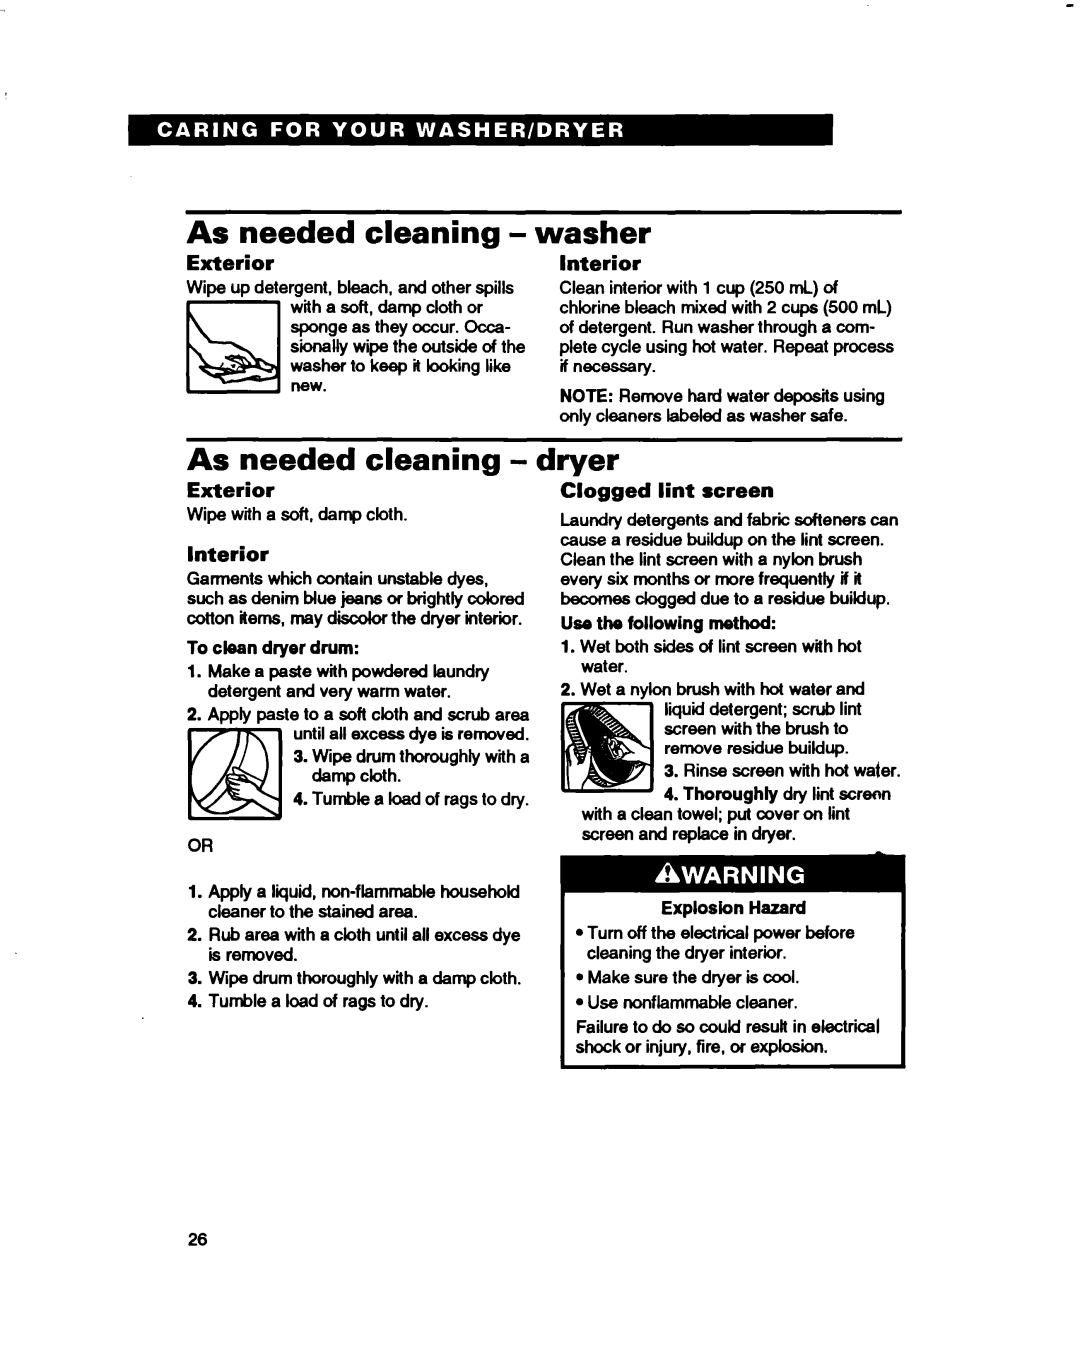 Whirlpool 3396314 warranty As needed cleaning - washer, As needed cleaning - dryer, Exterior, Interior, Clogged lint screen 